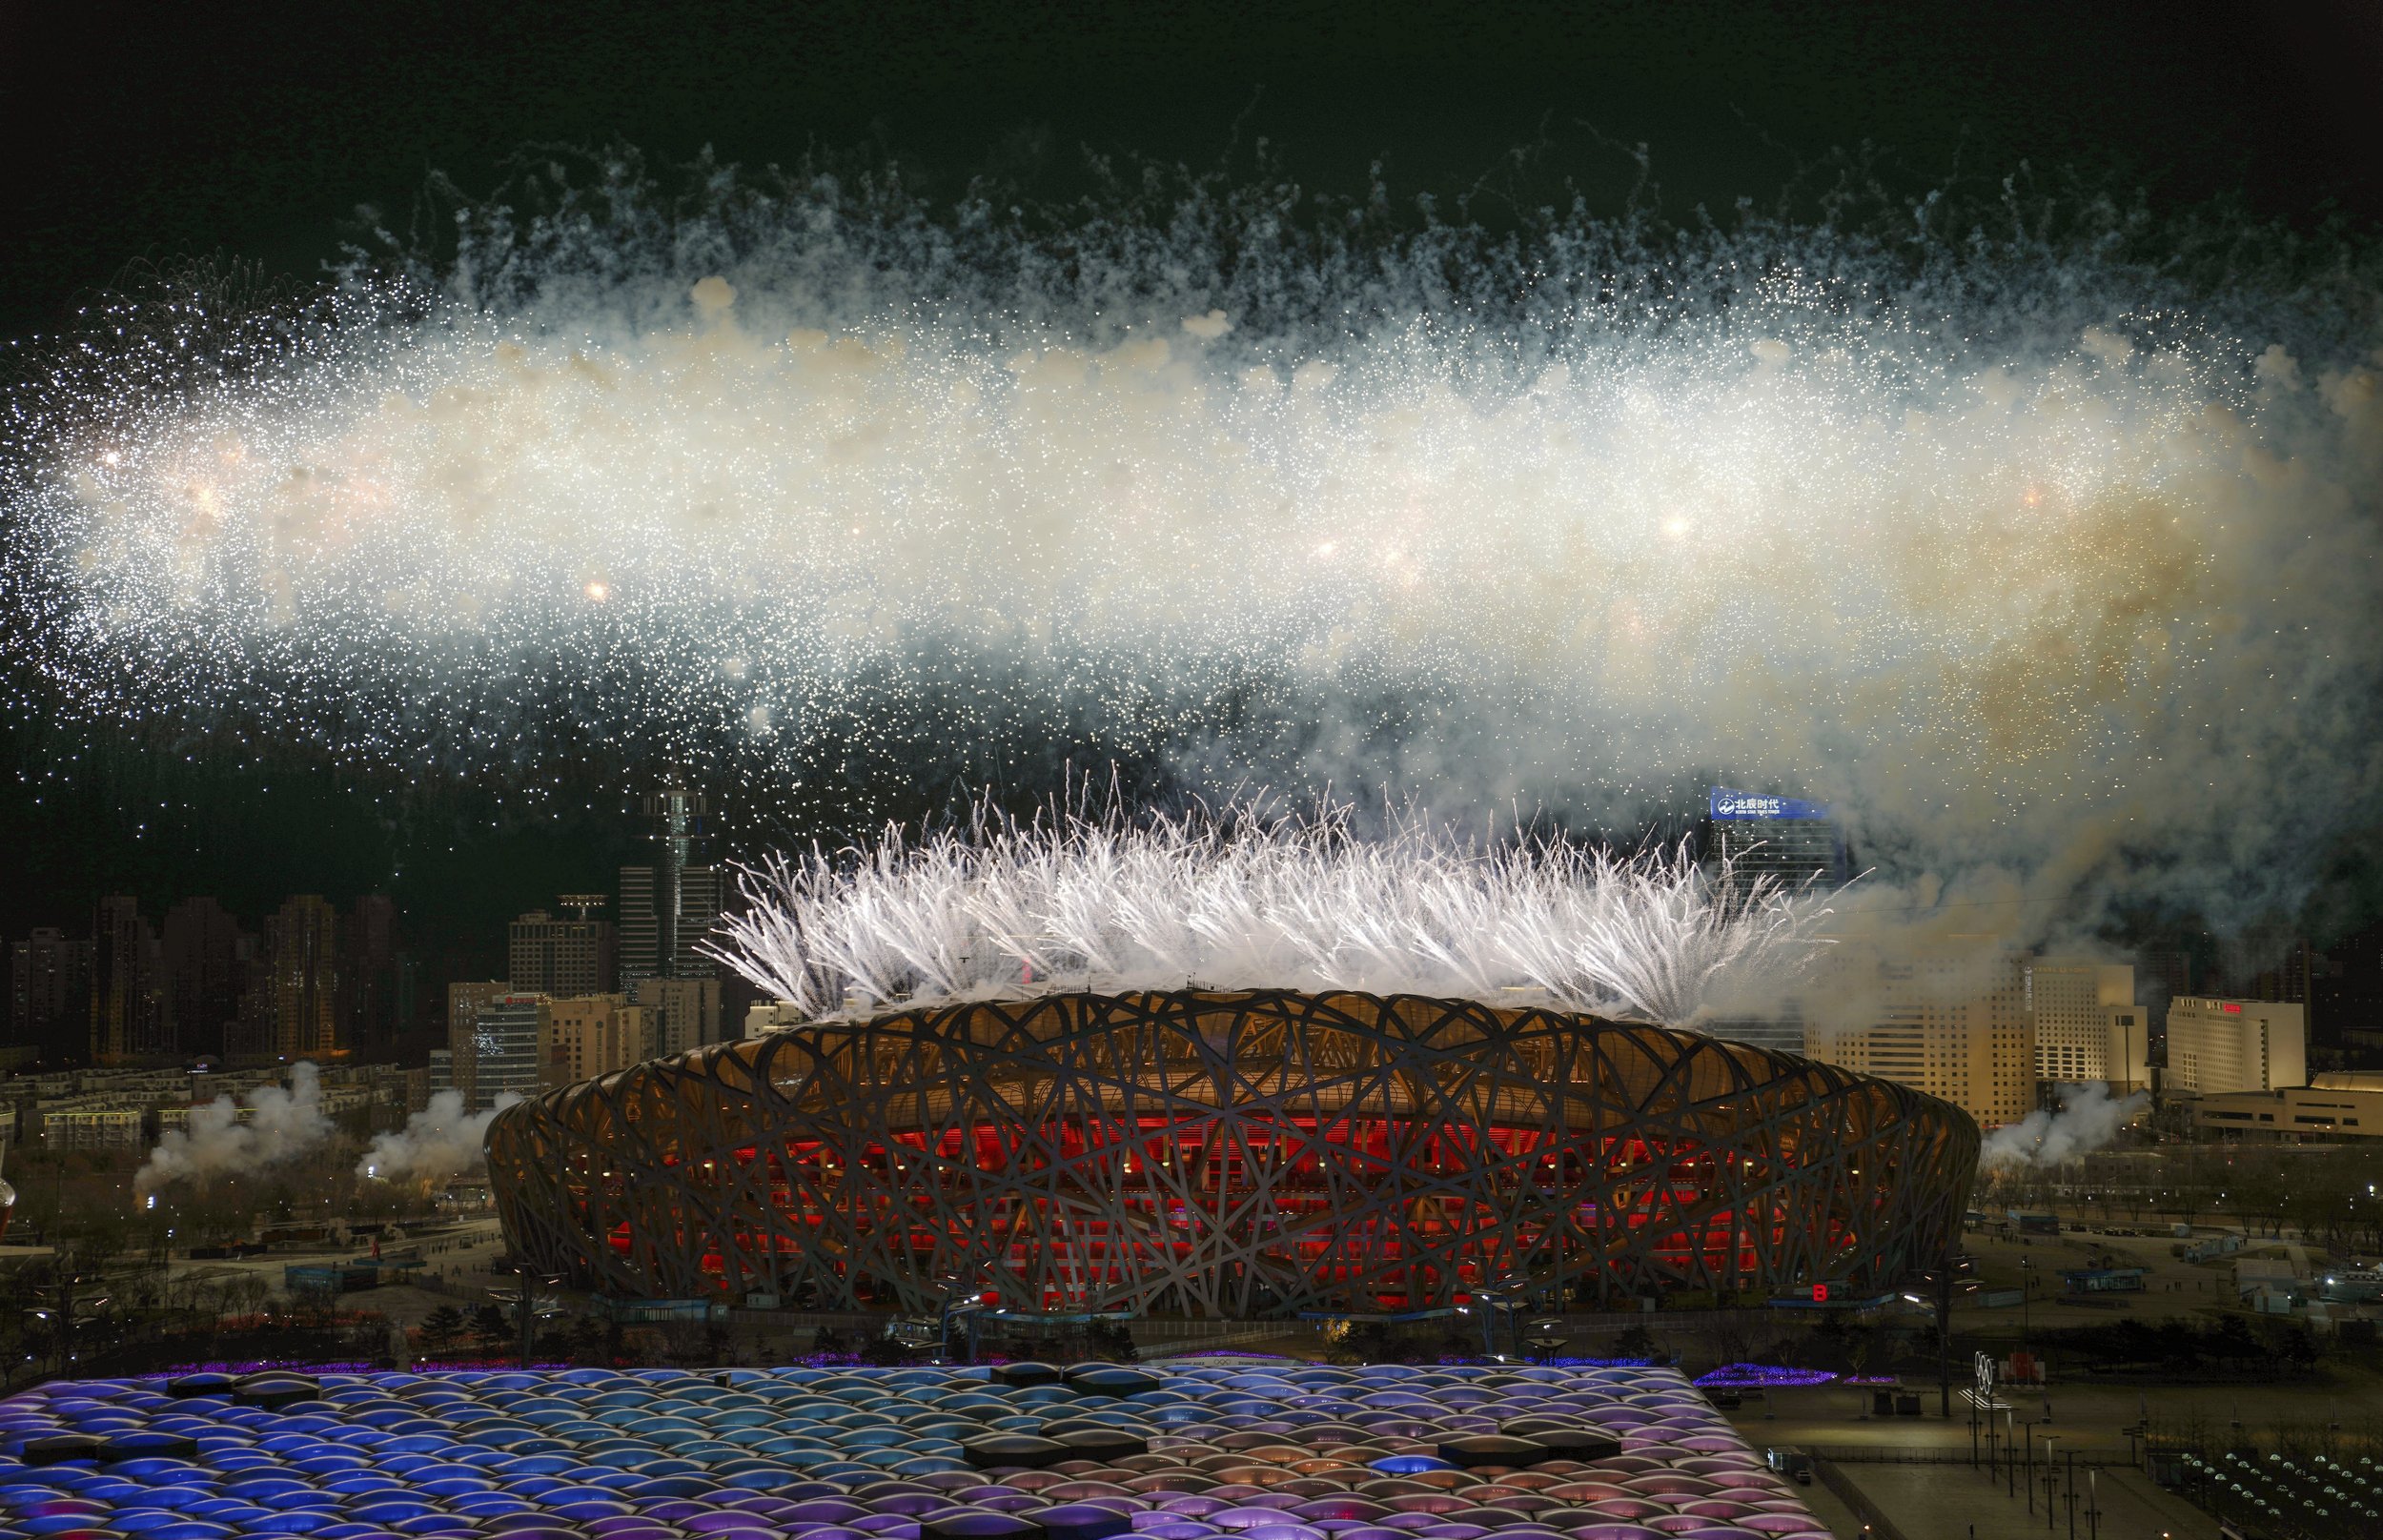  Fireworks illuminate the night sky during the opening ceremony of the 2022 Winter Olympics, Friday, Feb. 4, 2022, in Beijing.  (Xing Guangli/Pool Photo via AP) 